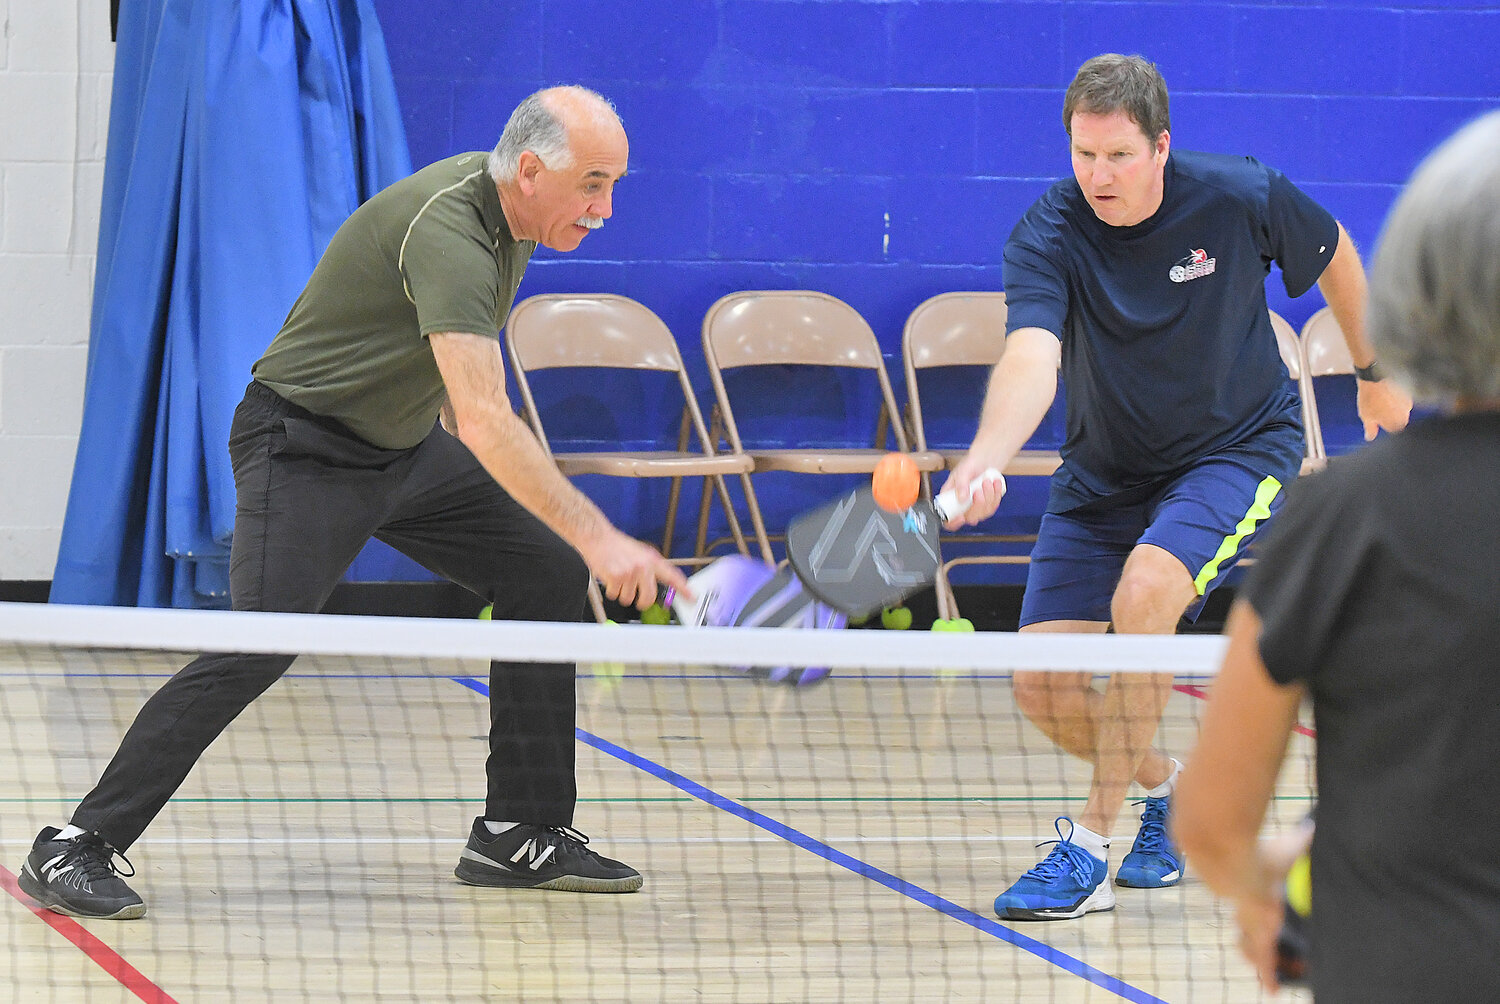 Dave Meislin (left) makes a return during pickleball play Thursday evening at the Jewish Community Center with Jamie King.